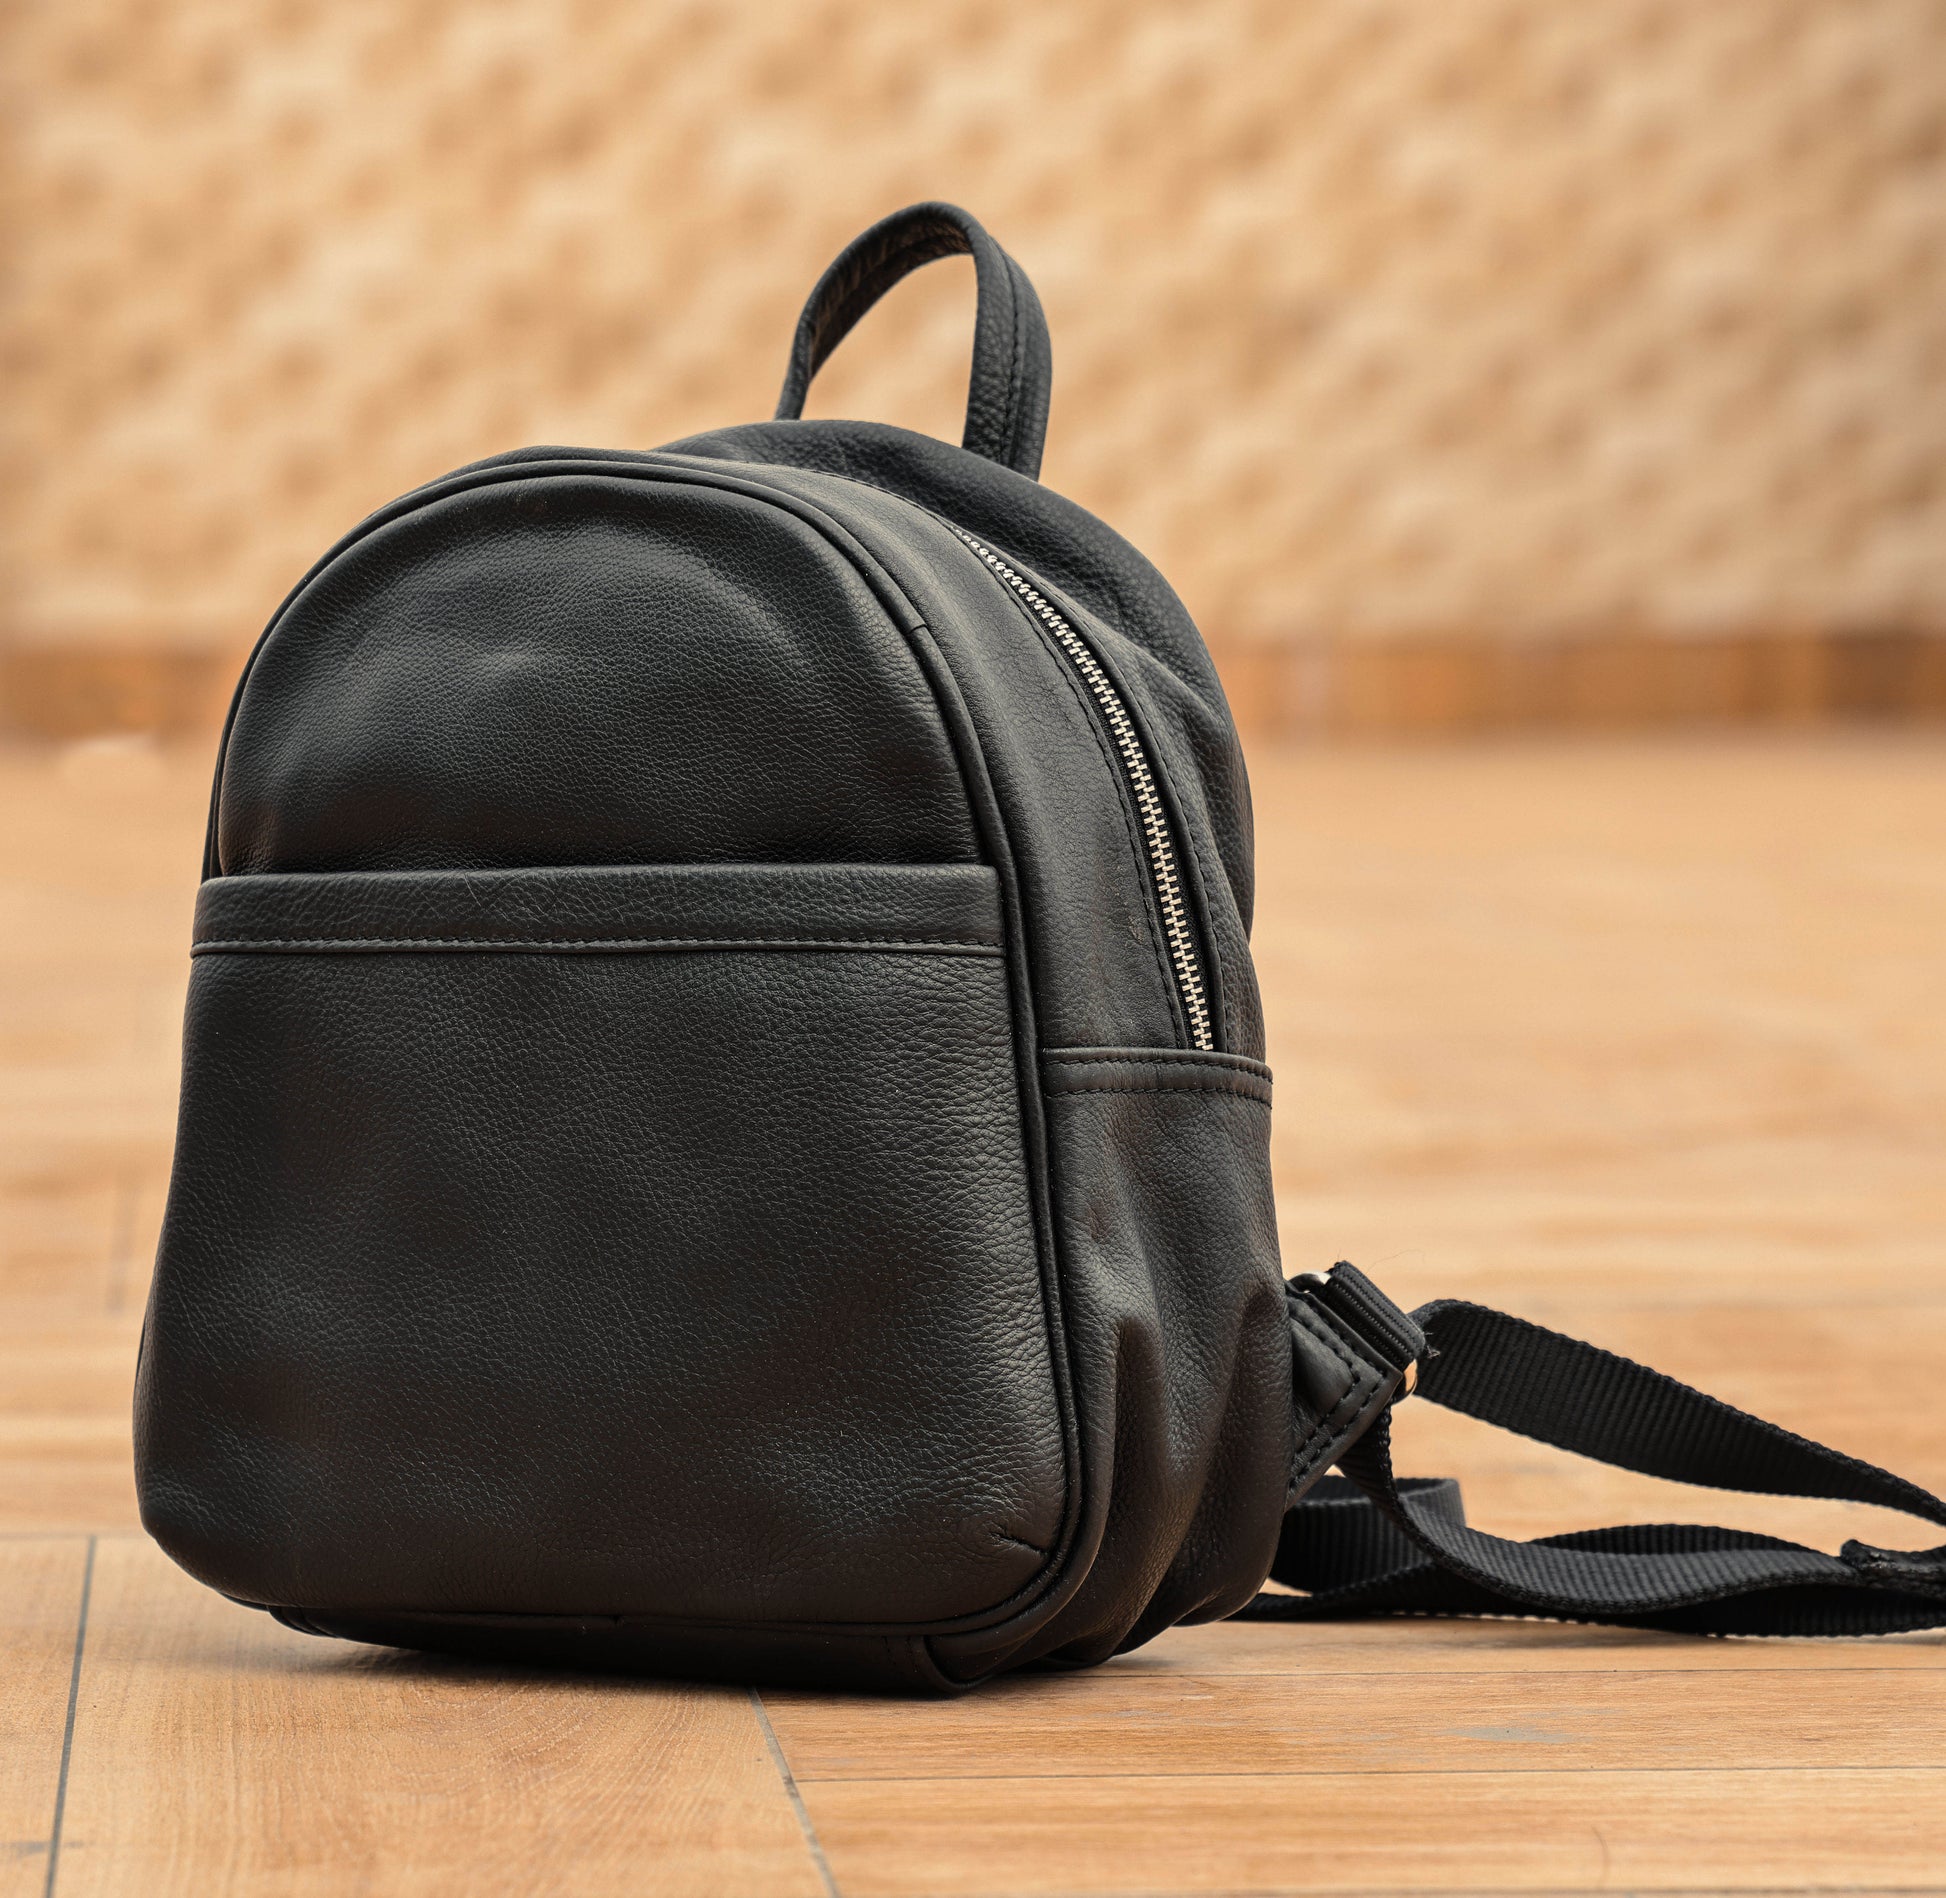 Tan NDM Leather Backpack: Elevate Your Style with Timeless Elegance. - CELTICINDIA